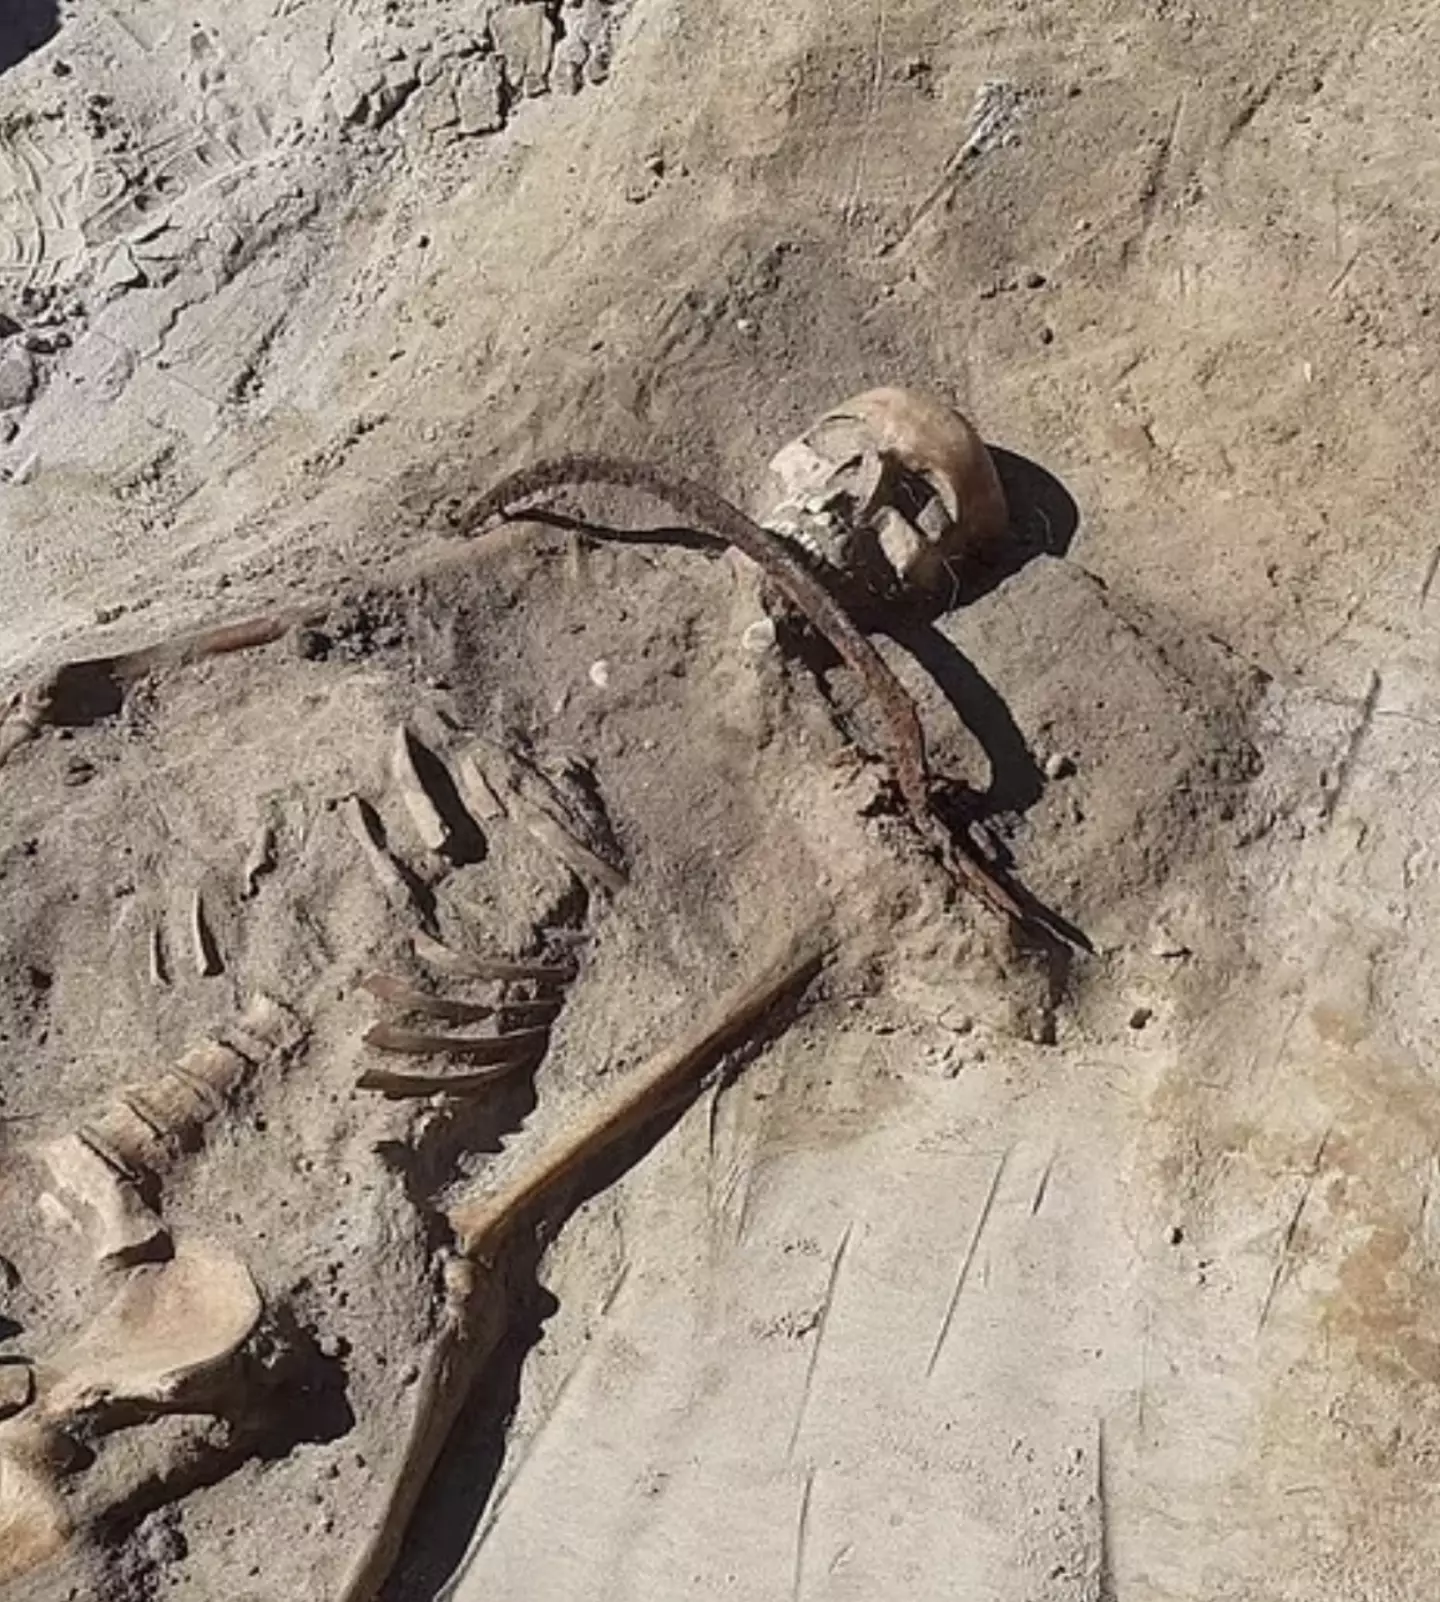 The 'vampire' skeleton had a sickle over the throat.